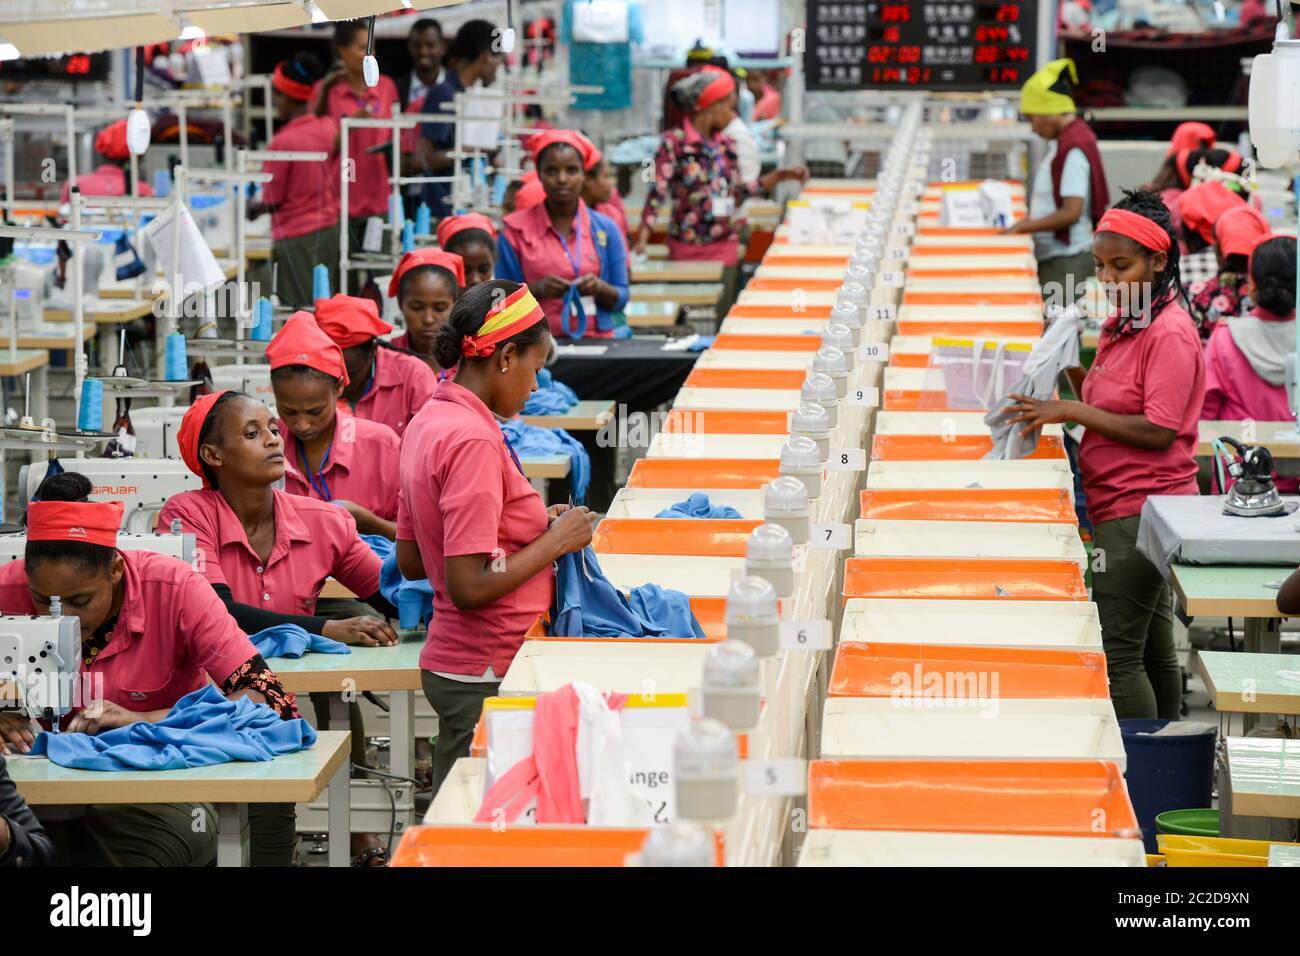 ETHIOPIA , Southern Nations, Hawassa or Awasa, Hawassa Industrial Park, chinese-built for the ethiopian government to attract foreign investors with low rent and tax free to establish a textile industry and create thousands of new jobs, taiwanese company Everest Textile Co. Ltd.produces textiles from synthetic fabric for export, women at sewing machine in production line and Performance and efficiency display Stock Photo